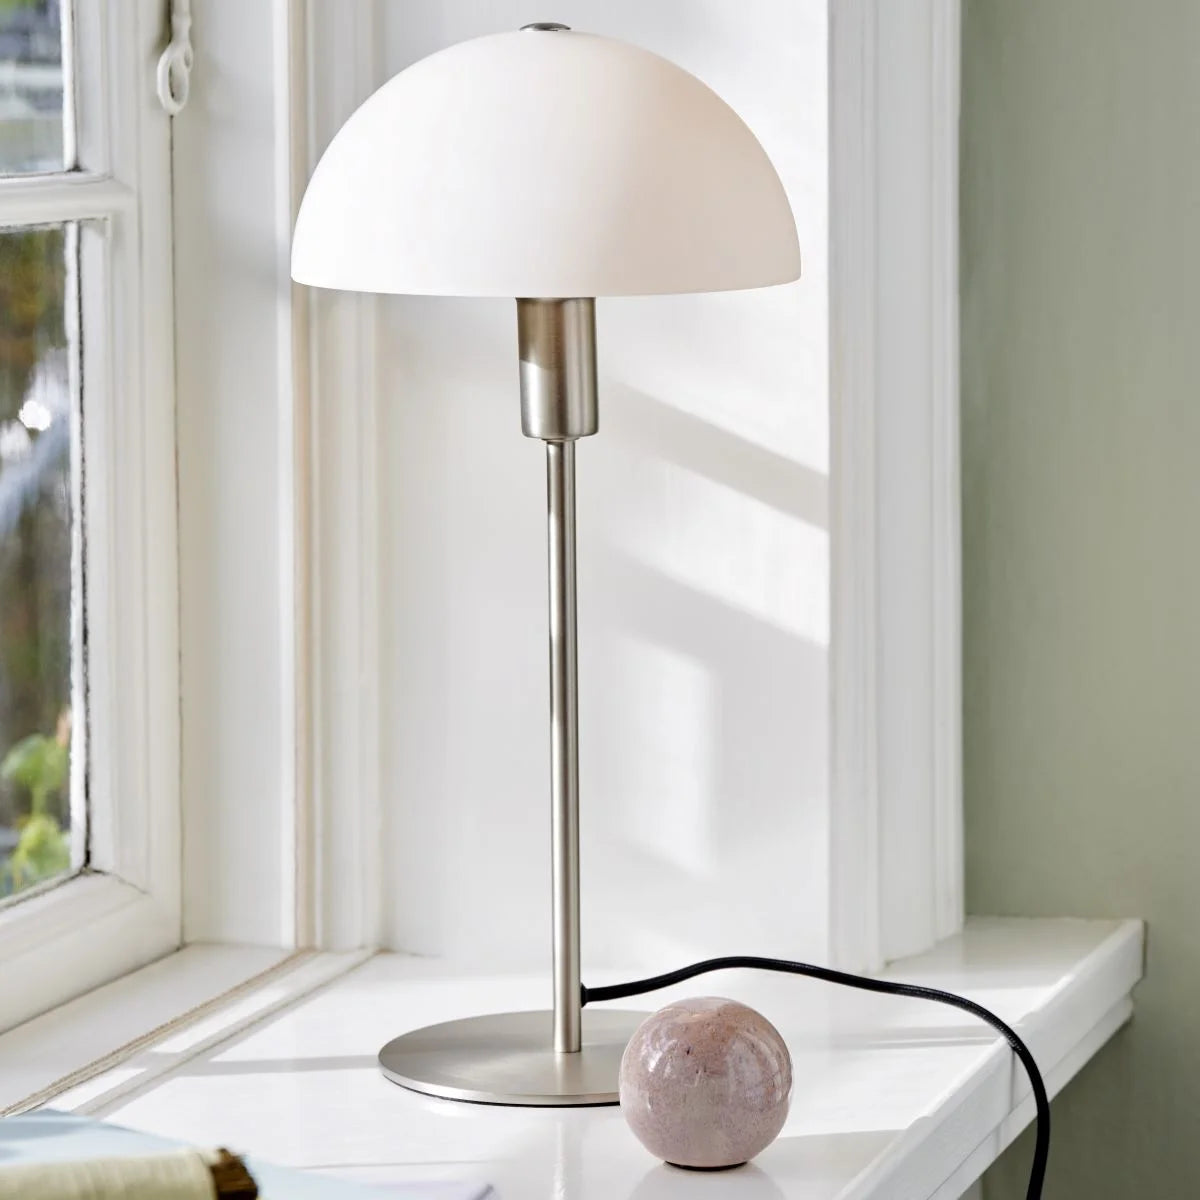 ELLEN table lamp silver with glass shade